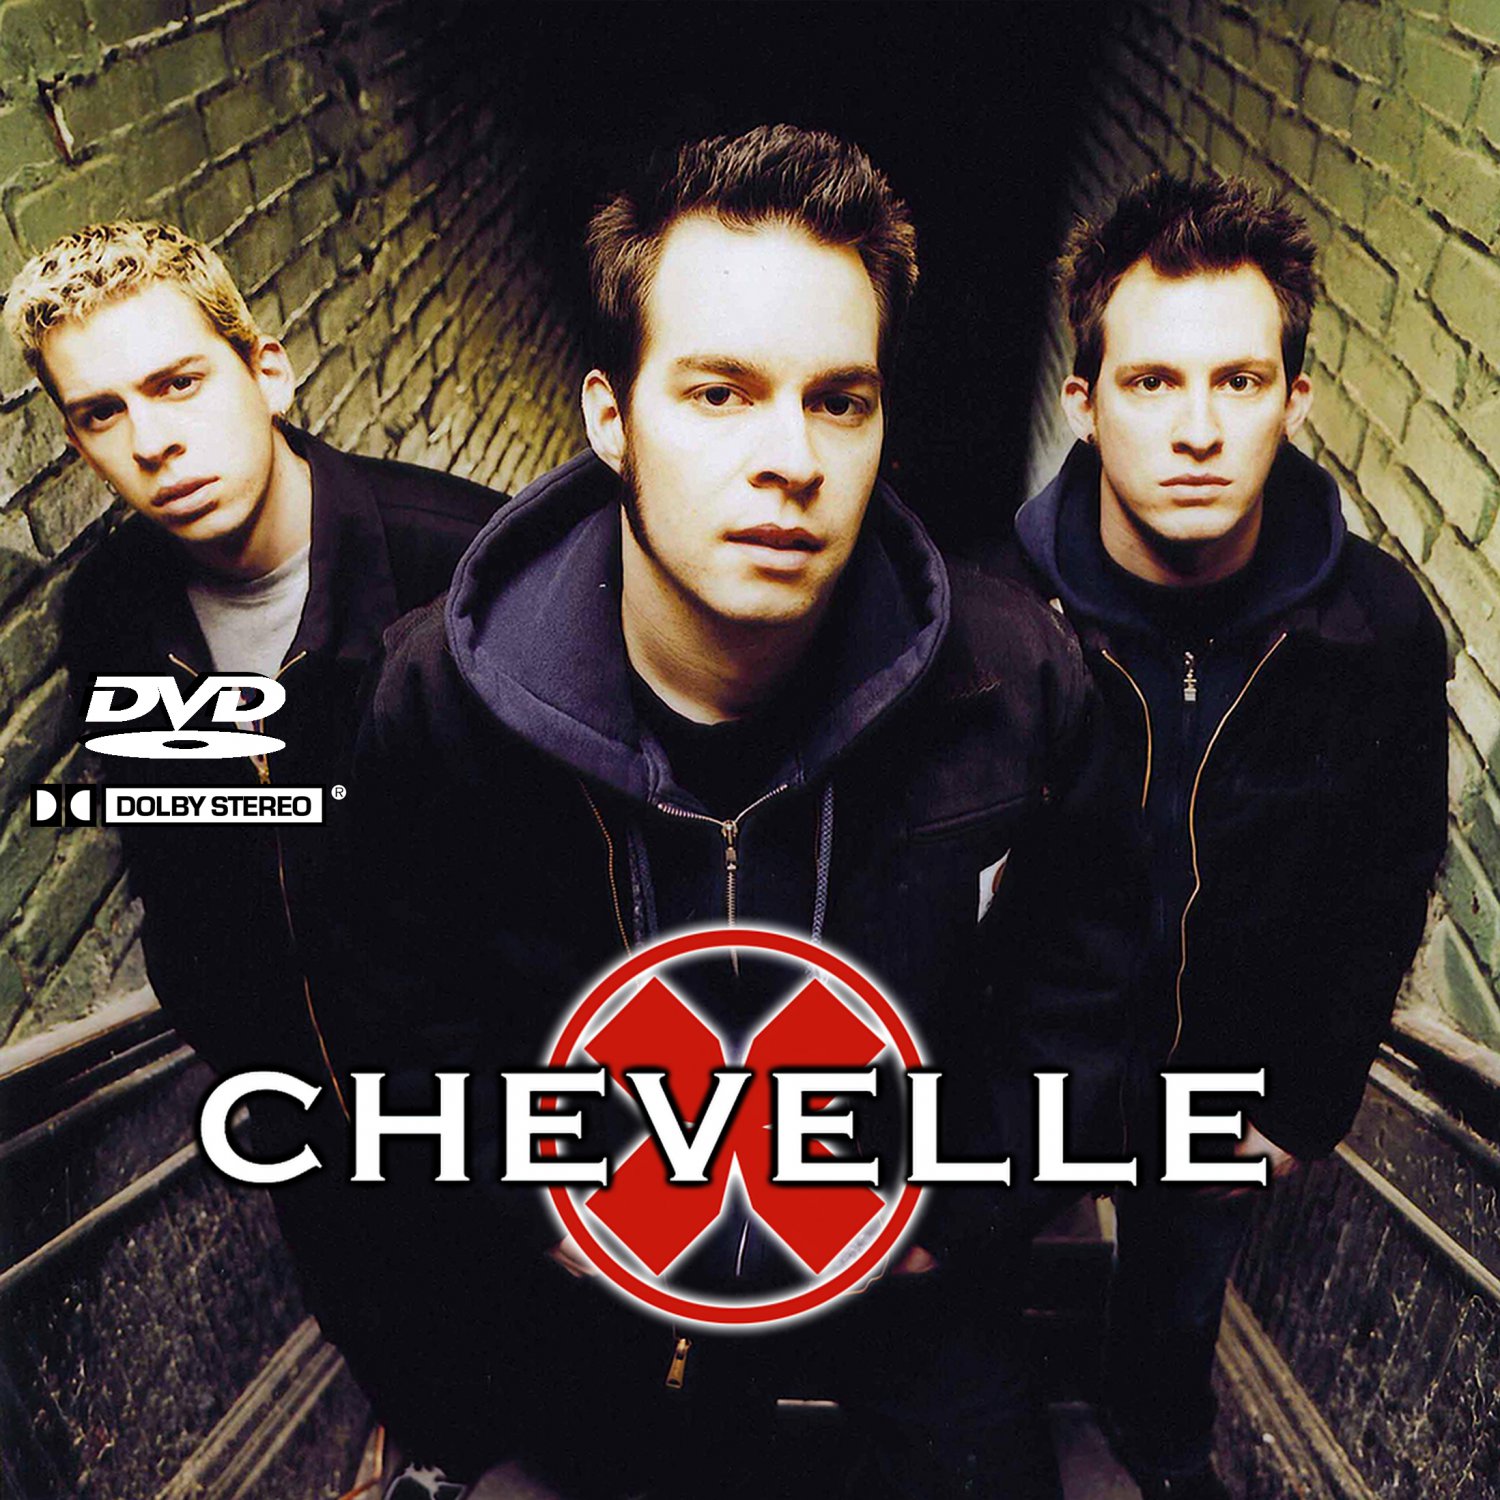 Chevelle Music Videos Collection (1 DVD) 19 Music Videos